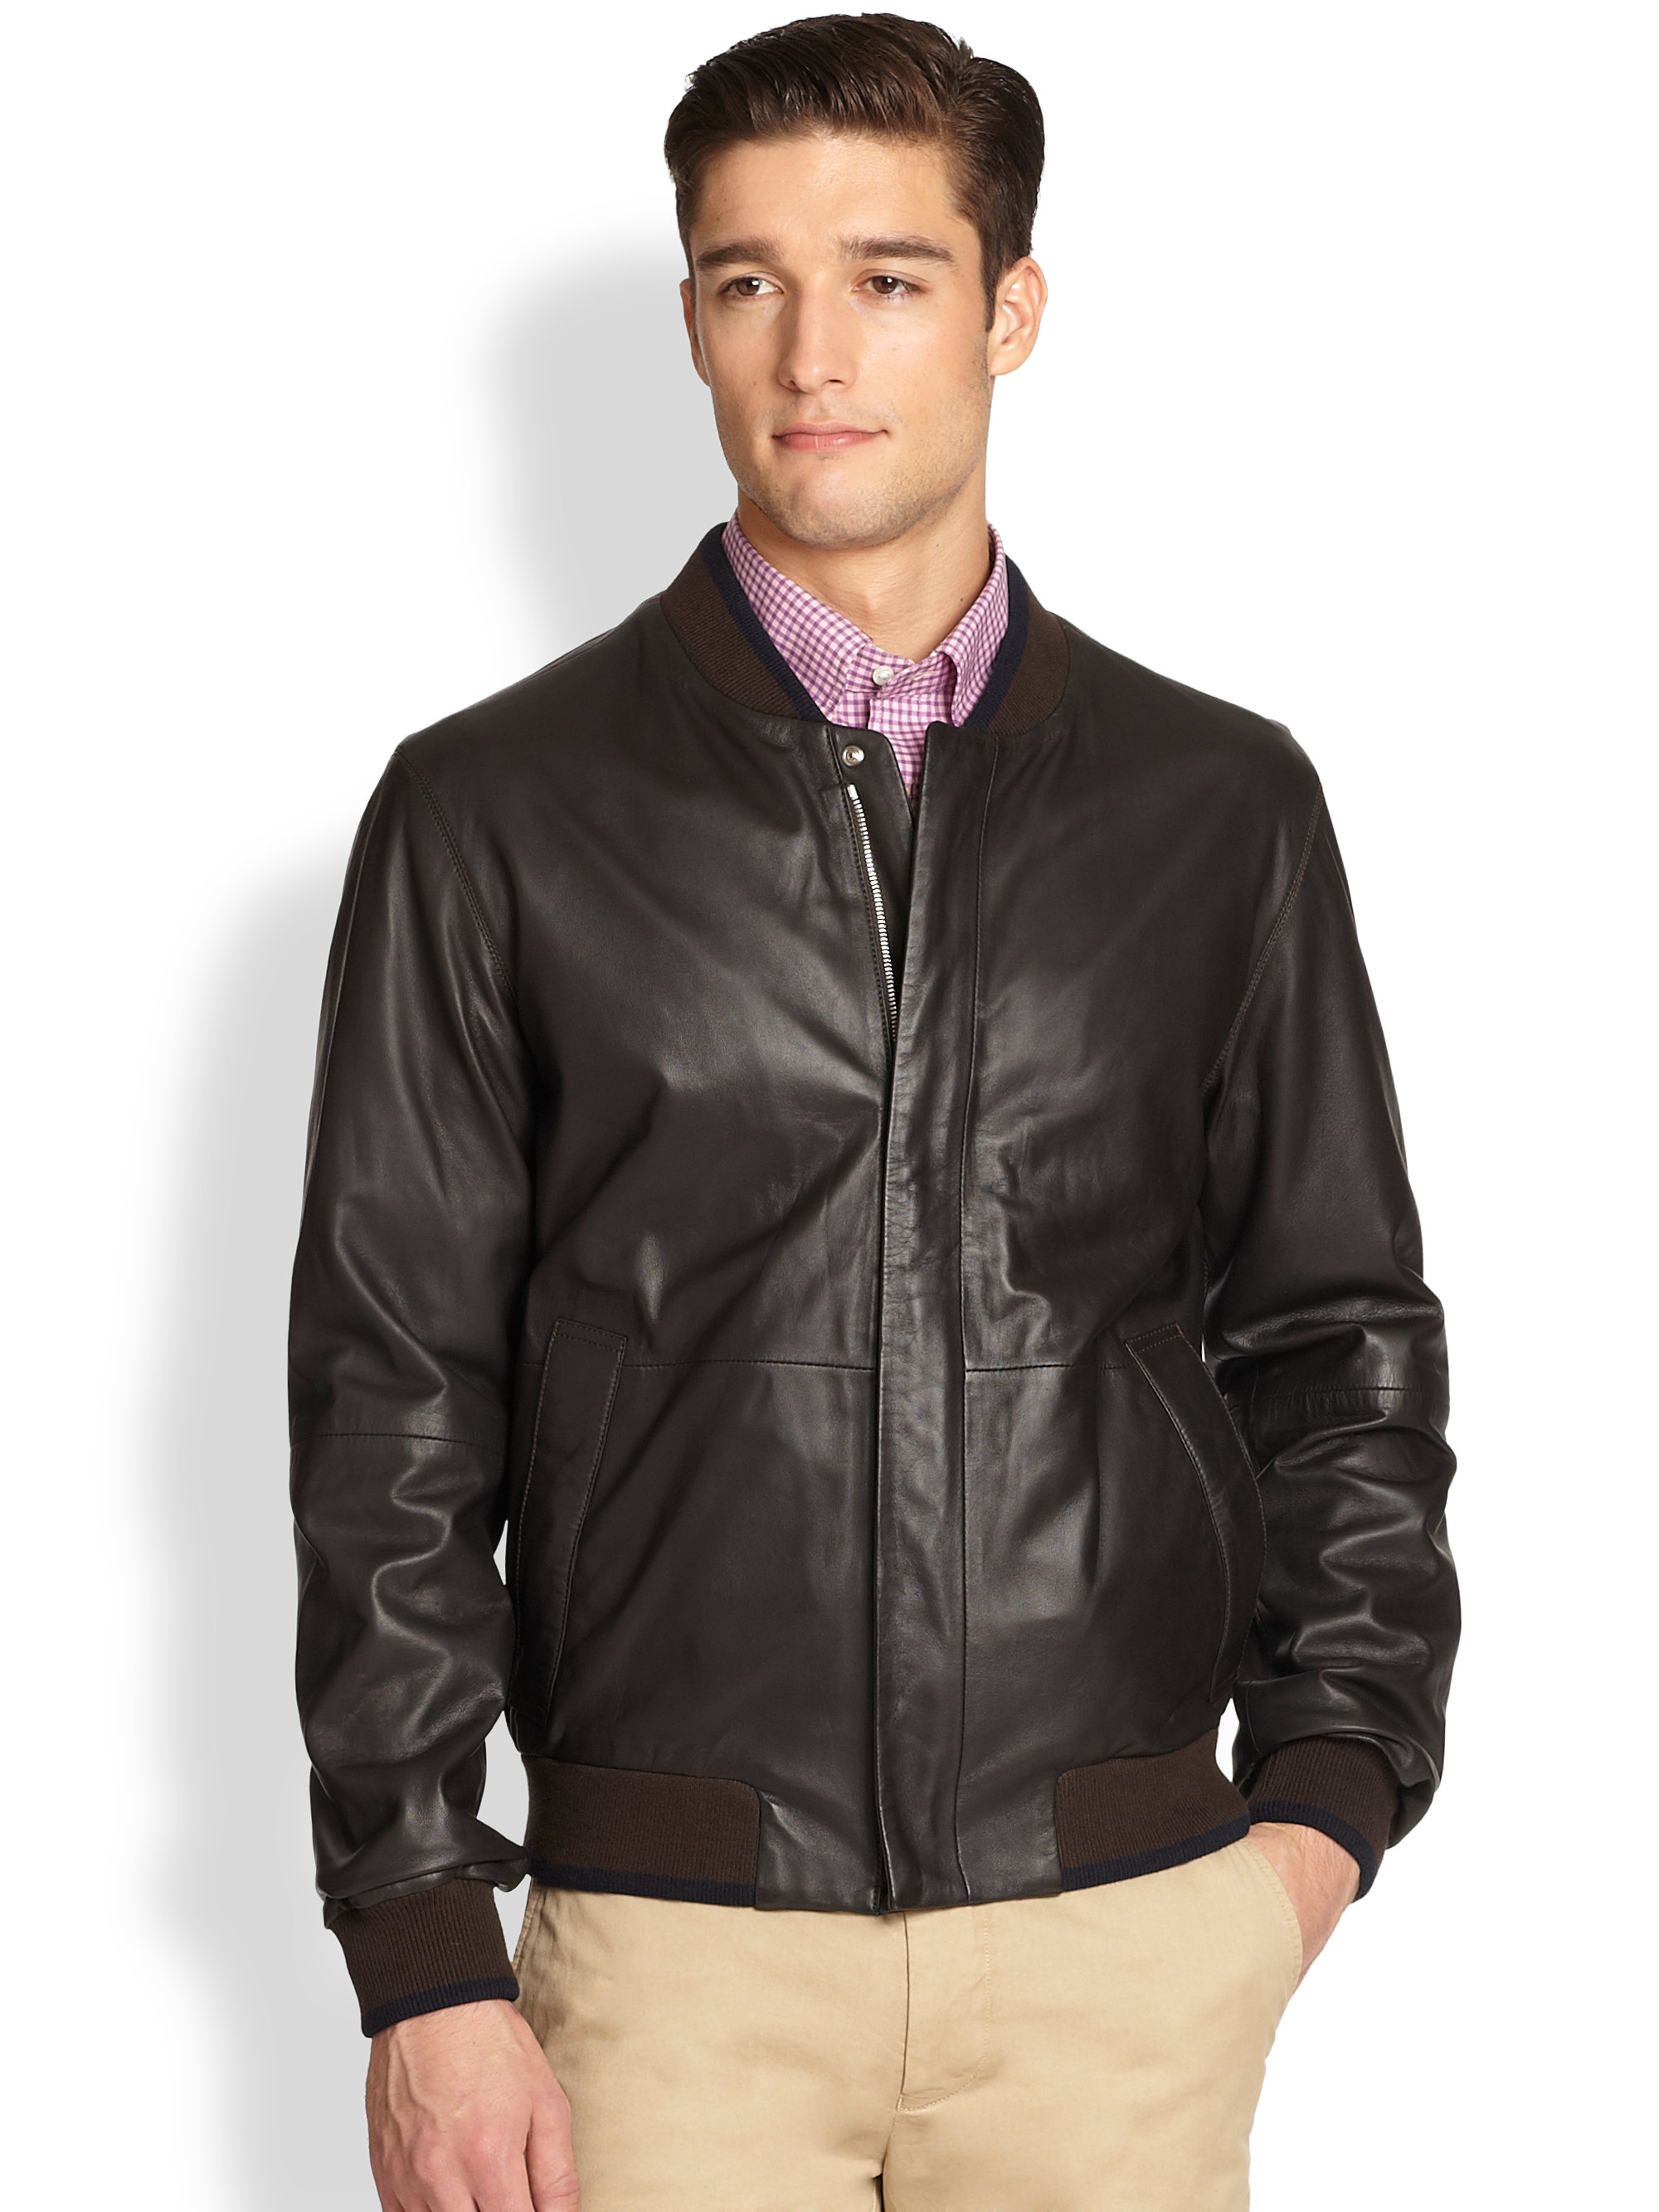 Lyst - Façonnable Leather Bomber Jacket in Brown for Men